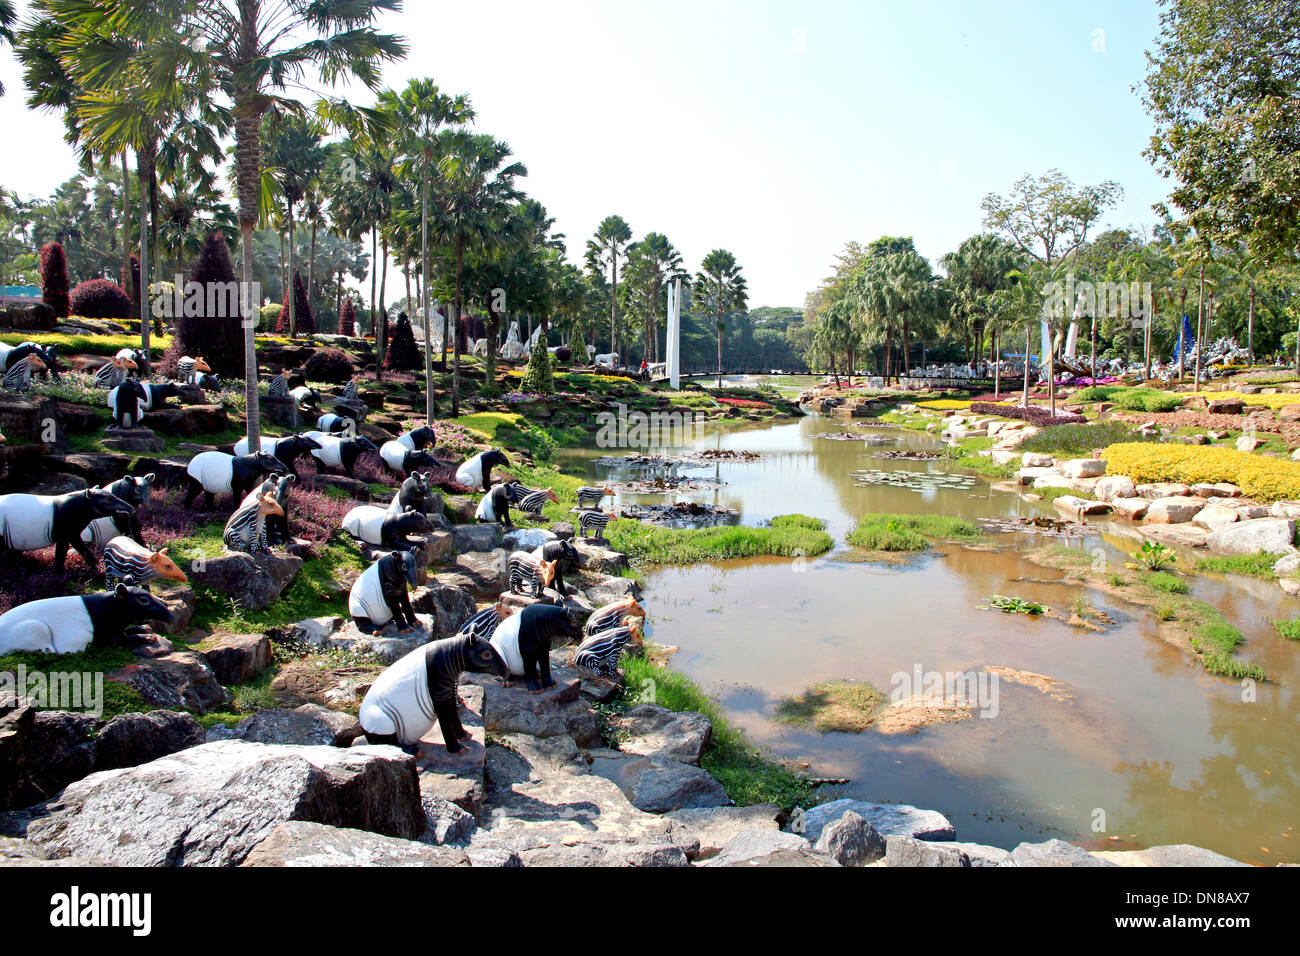 View of the park, with ponds and statues of animals. Stock Photo